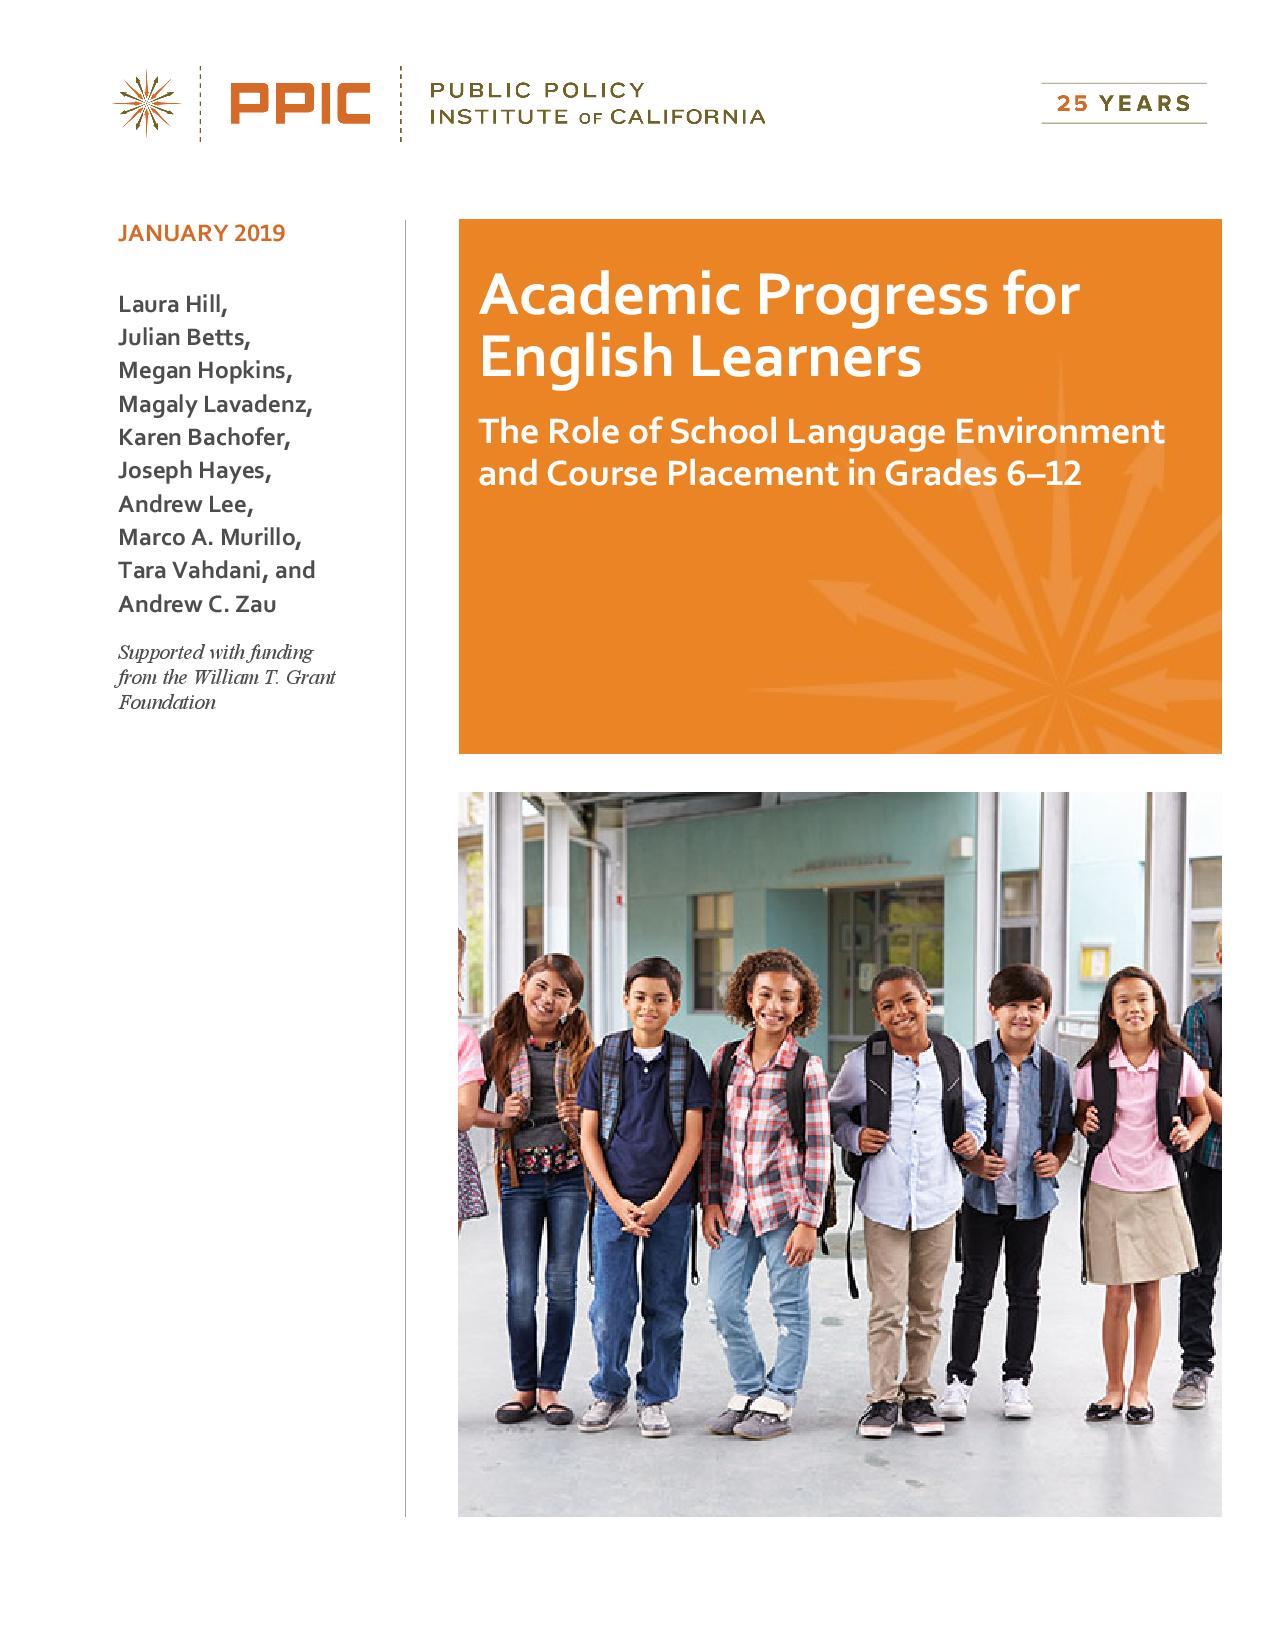 Academic Progress for English Learners_ The Role of School Language Environment and Course Placement in Grades 6-12-page-001.jpg